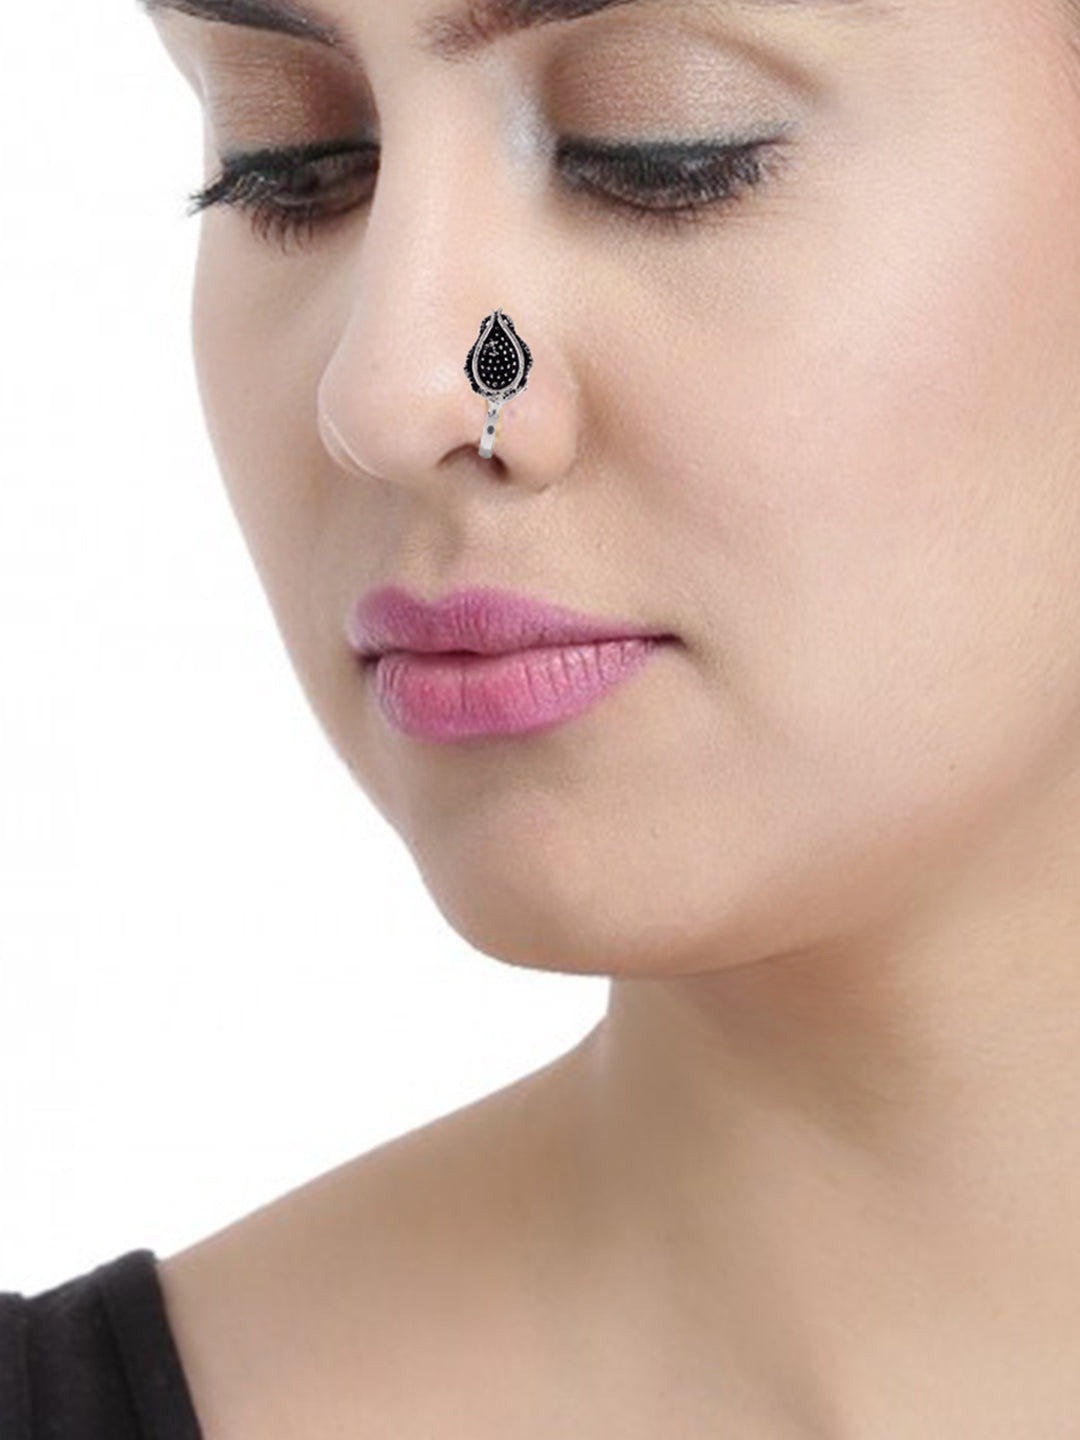 Buy Sterling Silver Nose Ring Hoop, Silver Nose Ring, Nose Hoop, Thin Nose  Ring, Nose Jewellery, Gift for Her, Unique Nose Ring Online in India - Etsy